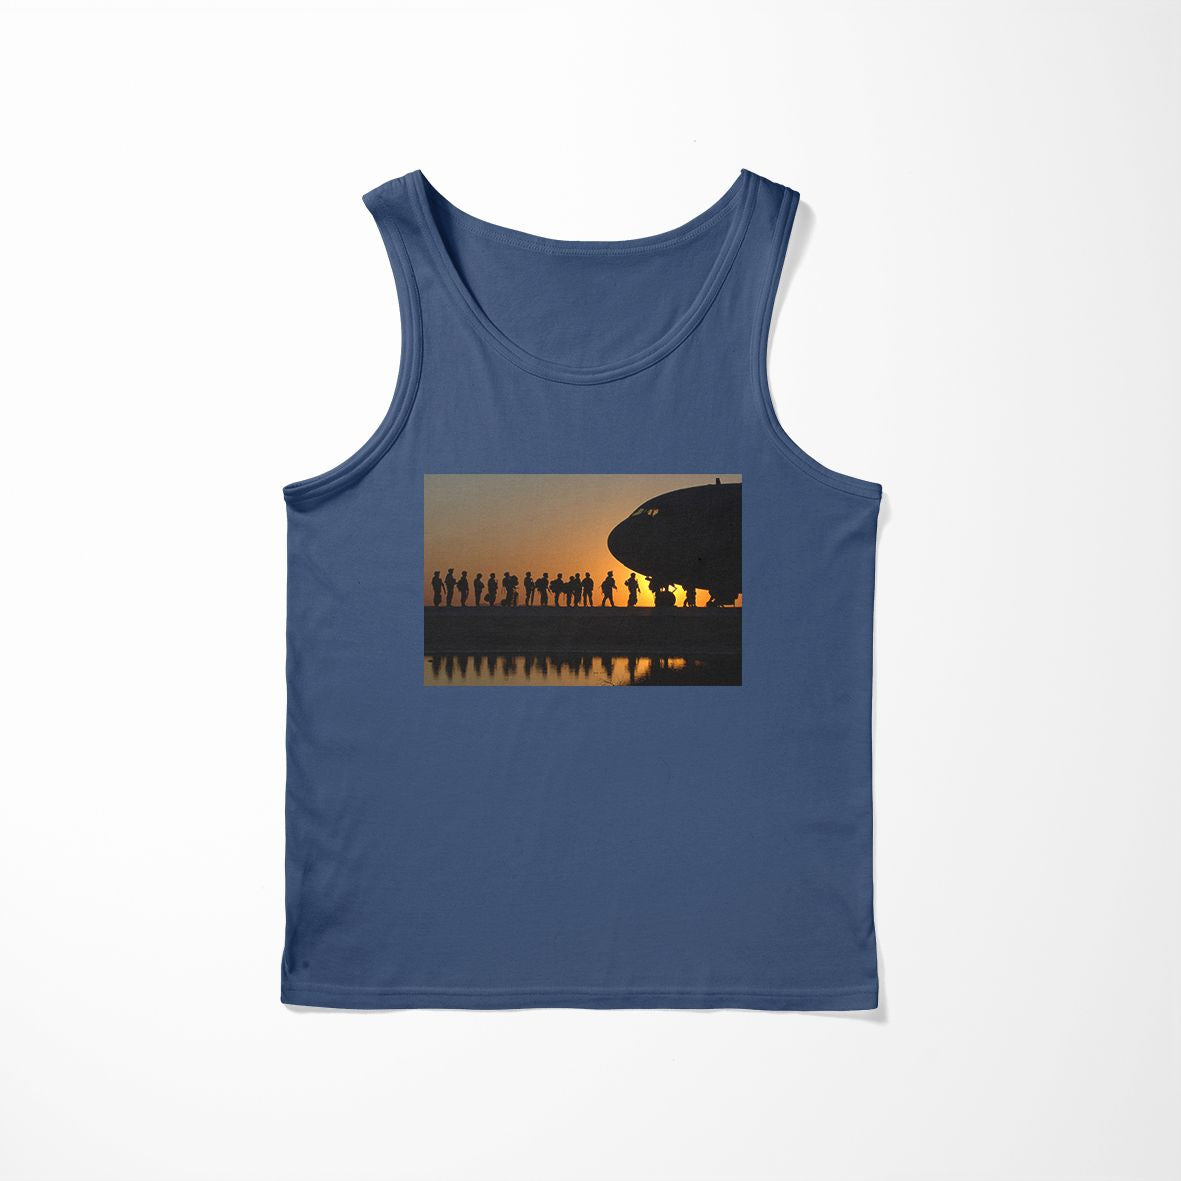 Band of Brothers Theme Soldiers Designed Tank Tops